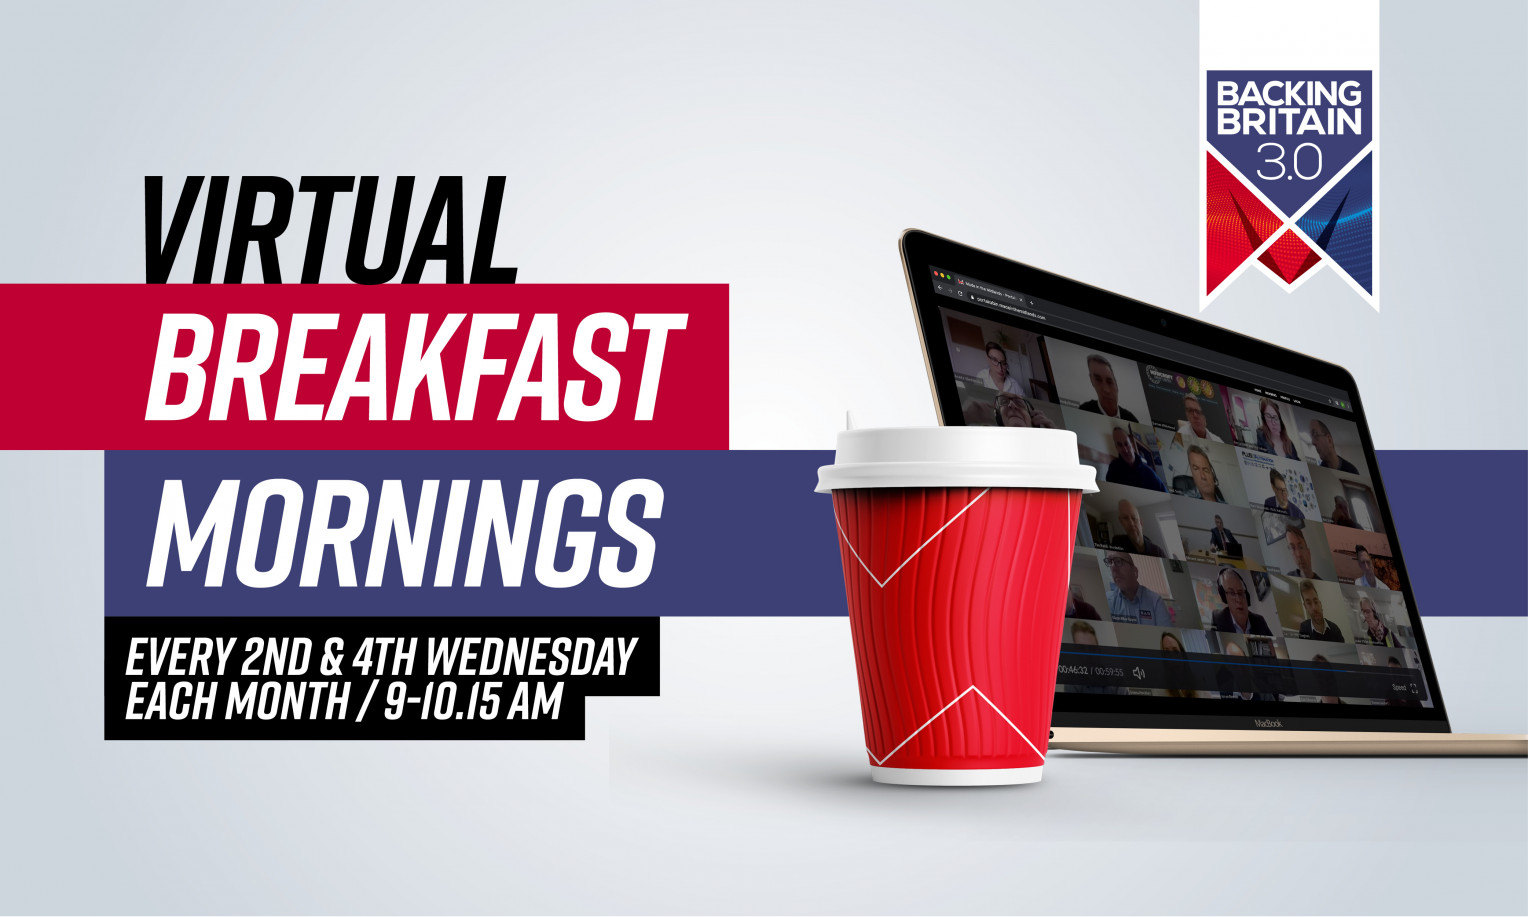 Backing Britain Virtual Breakfast Morning with Hayley Group, Portakabin and BCU